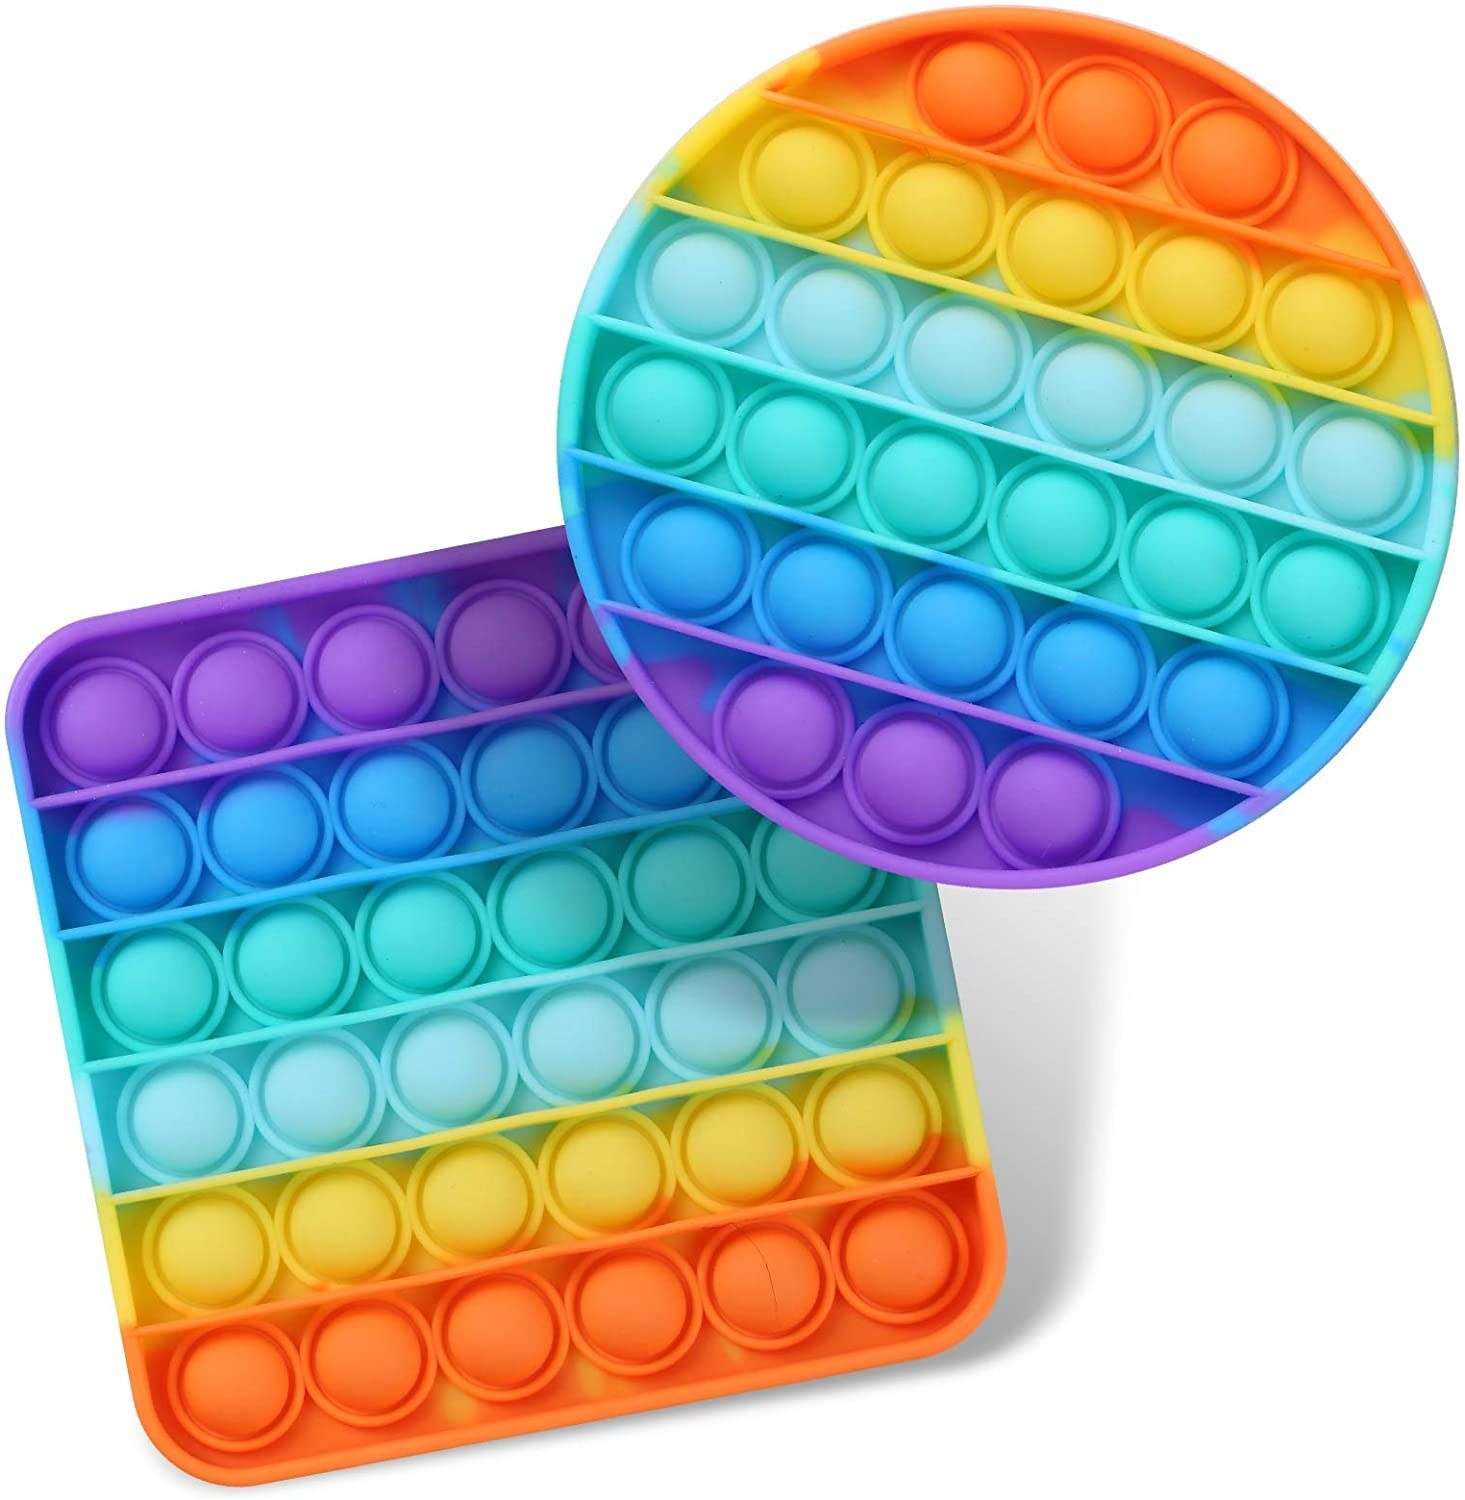 square and circle rubber toys with bubbles you can pop in and out